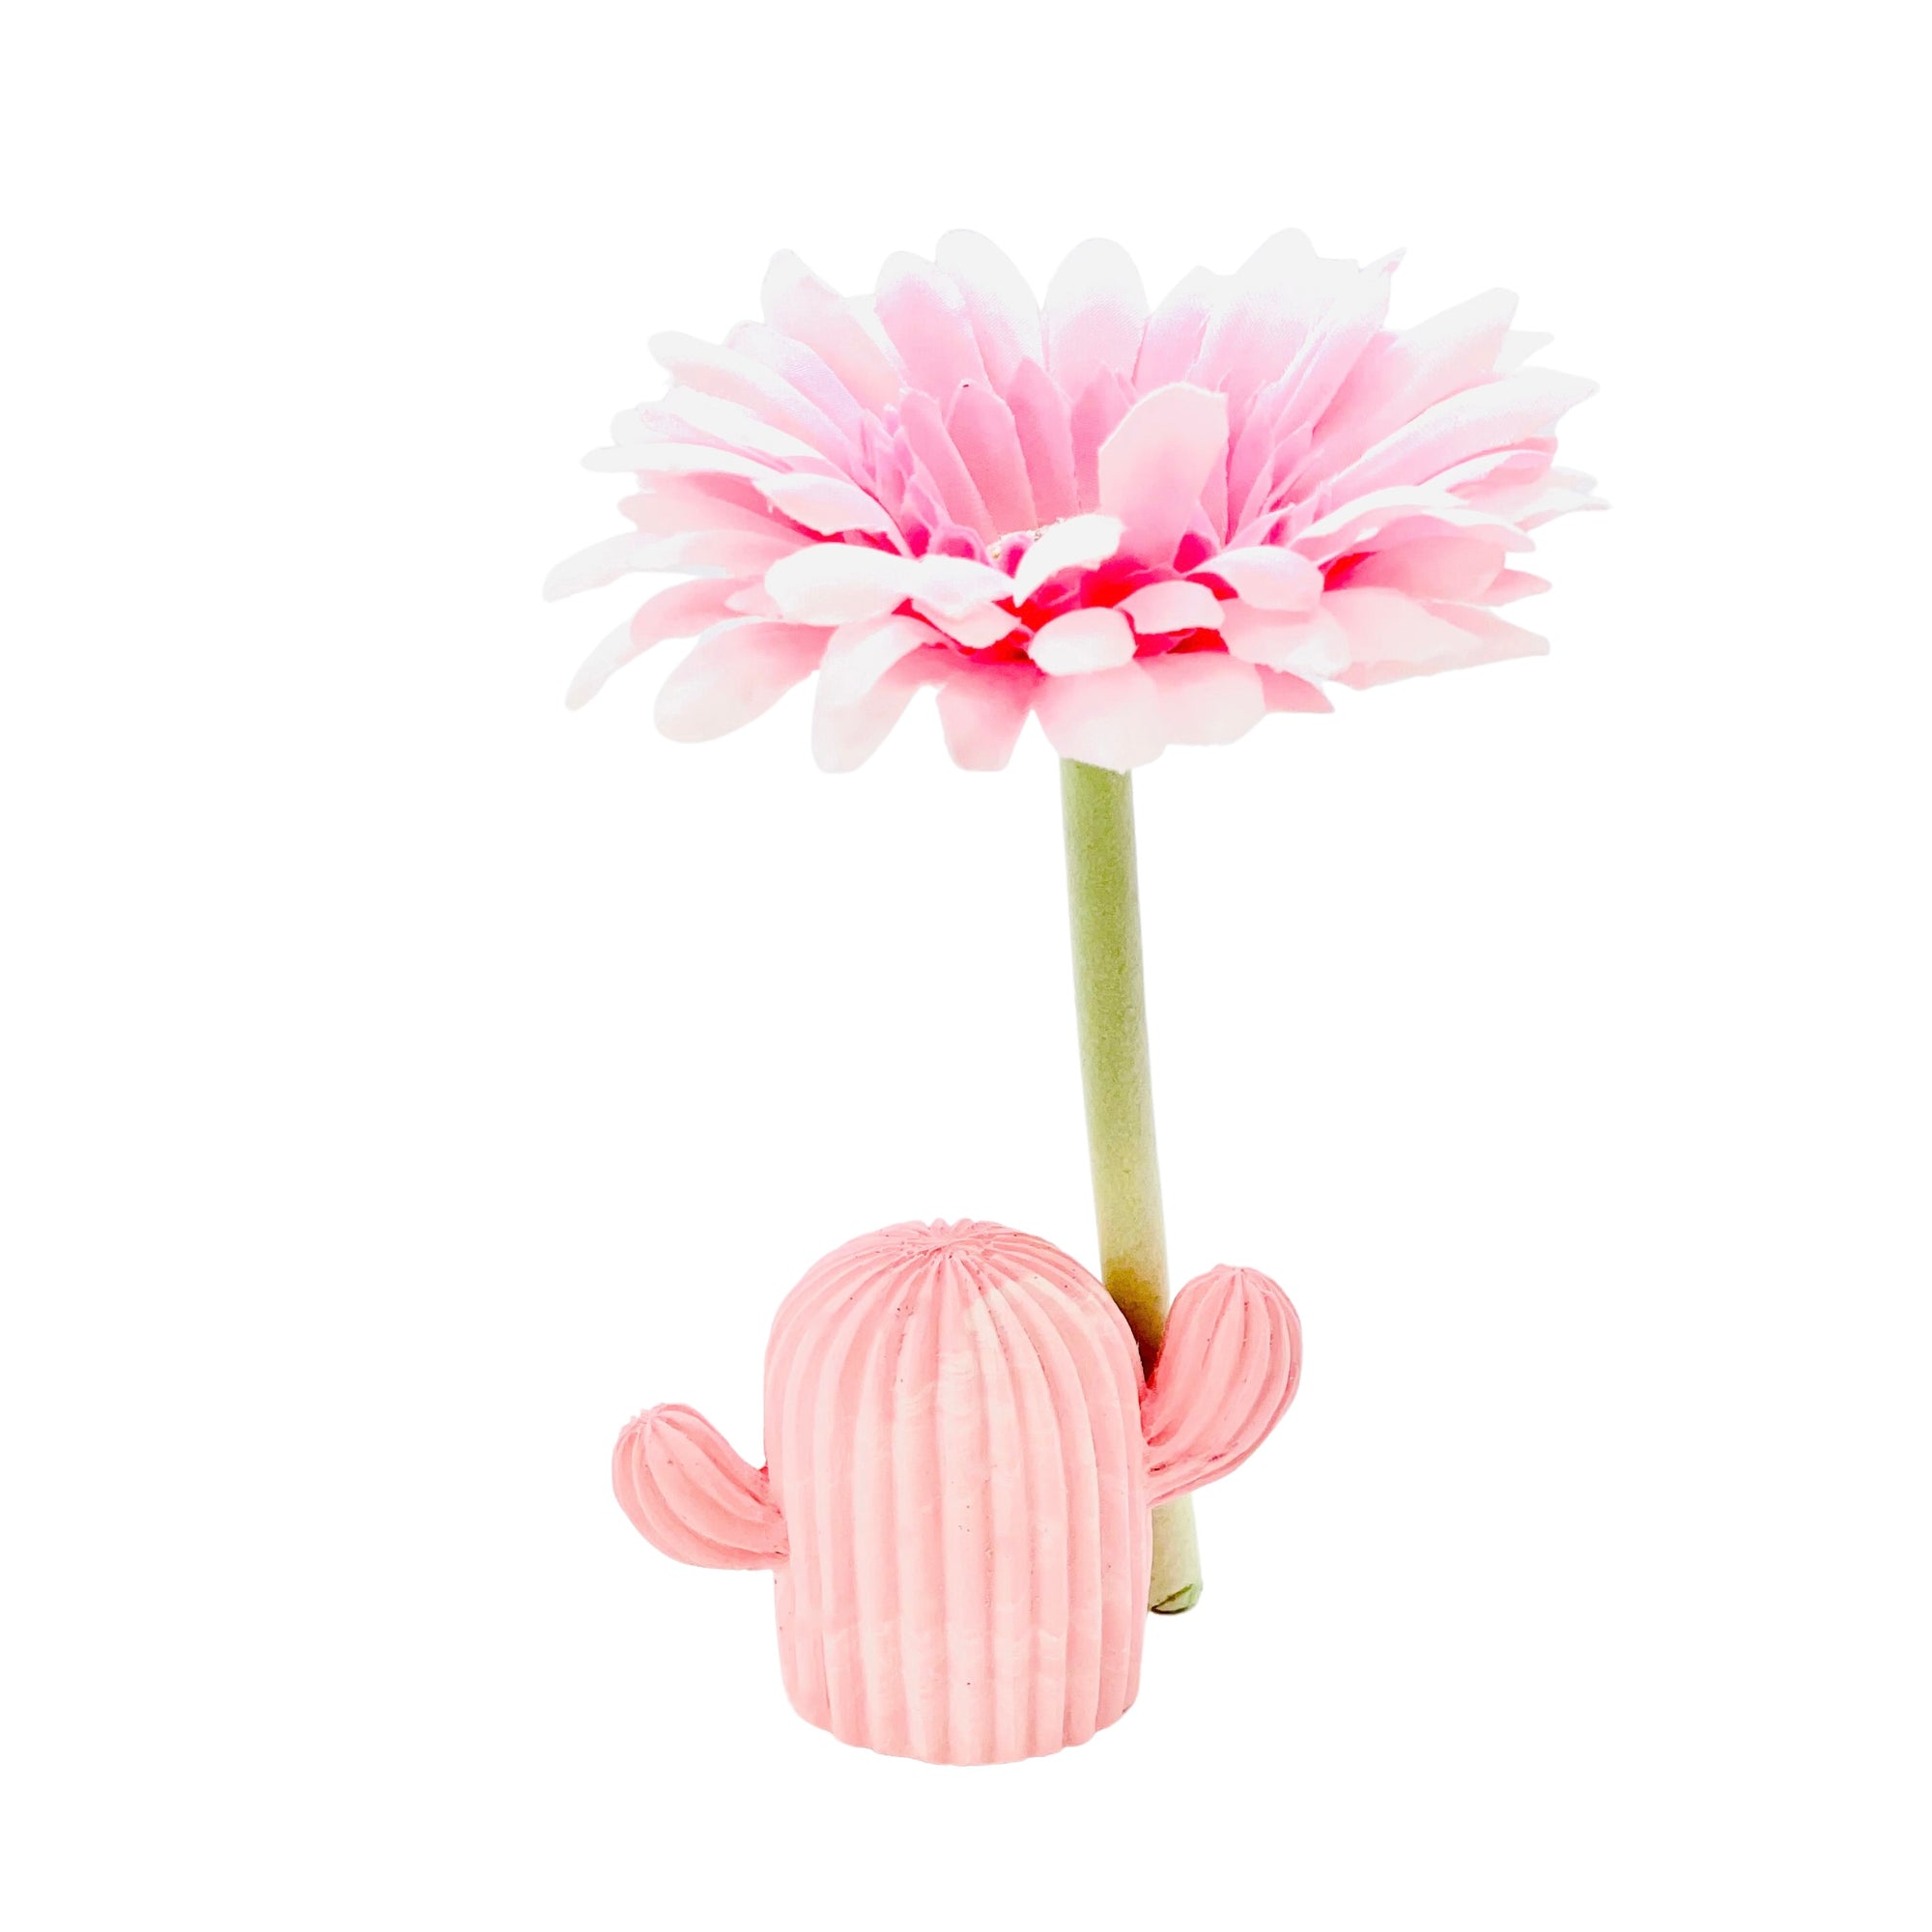 A small Jesmonite cactus measuring 7cm in height coloured with baby pink pigment.